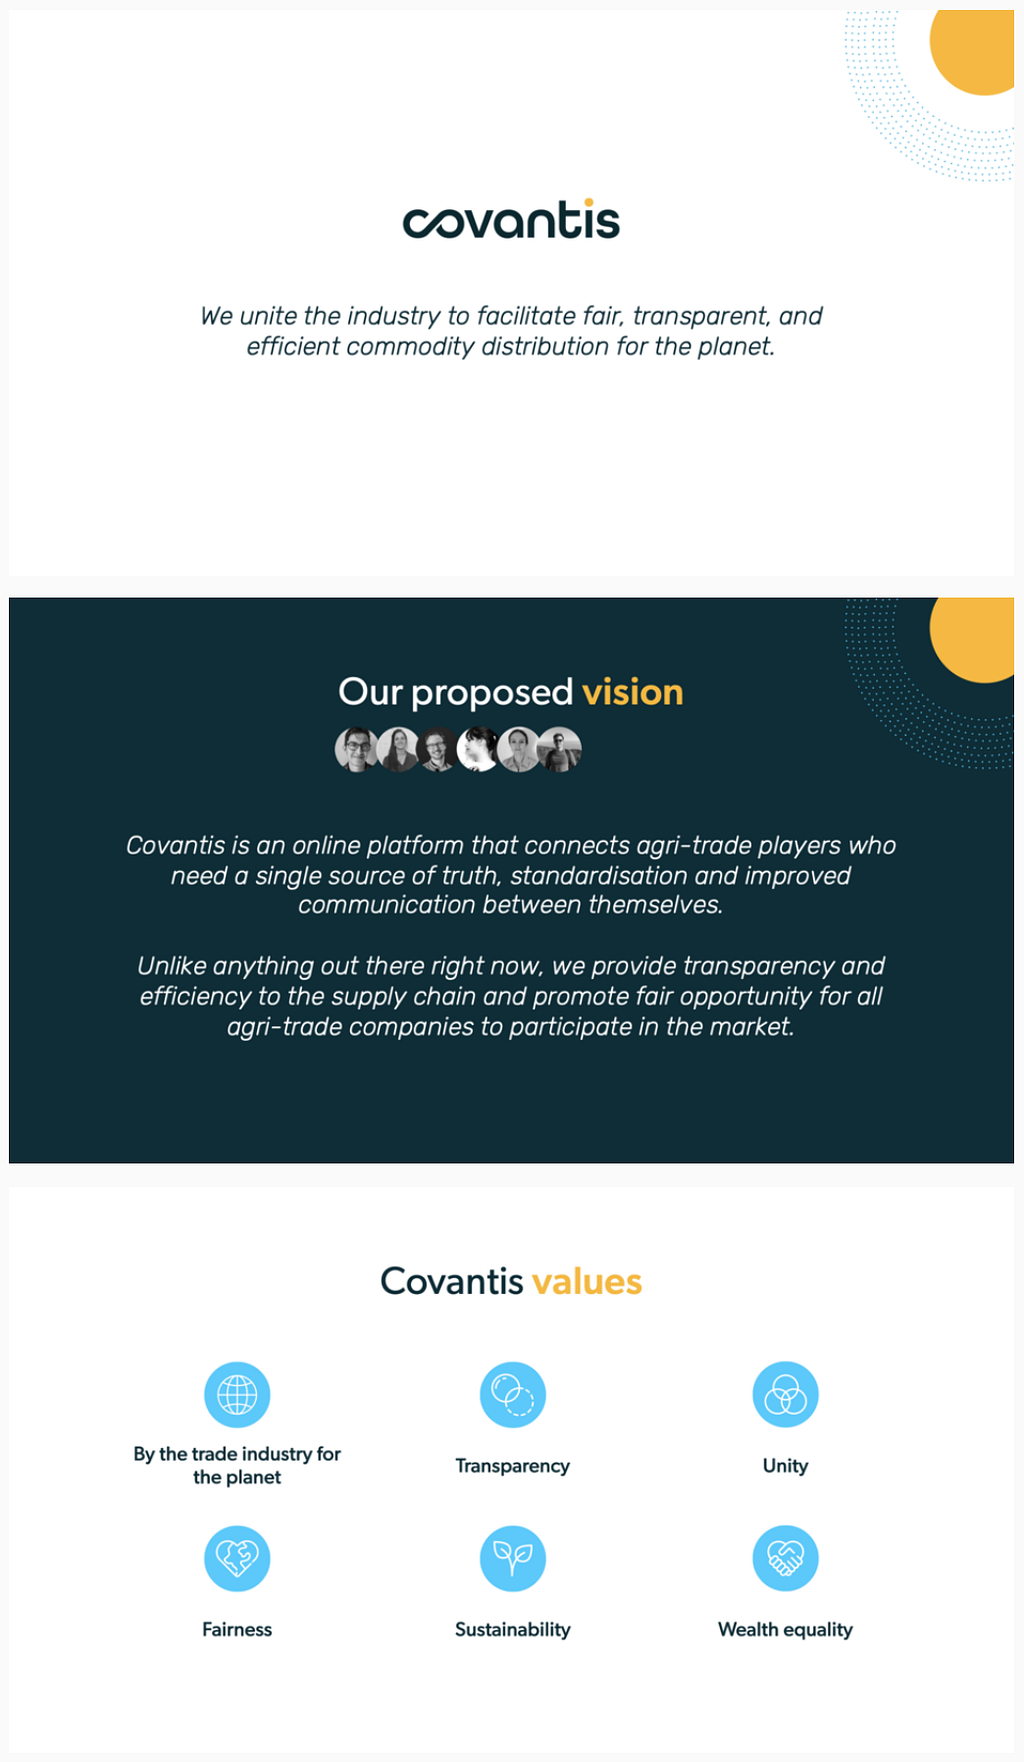 Three slides of a presentation, showing a purpose statement, a proposed vision, and six values.